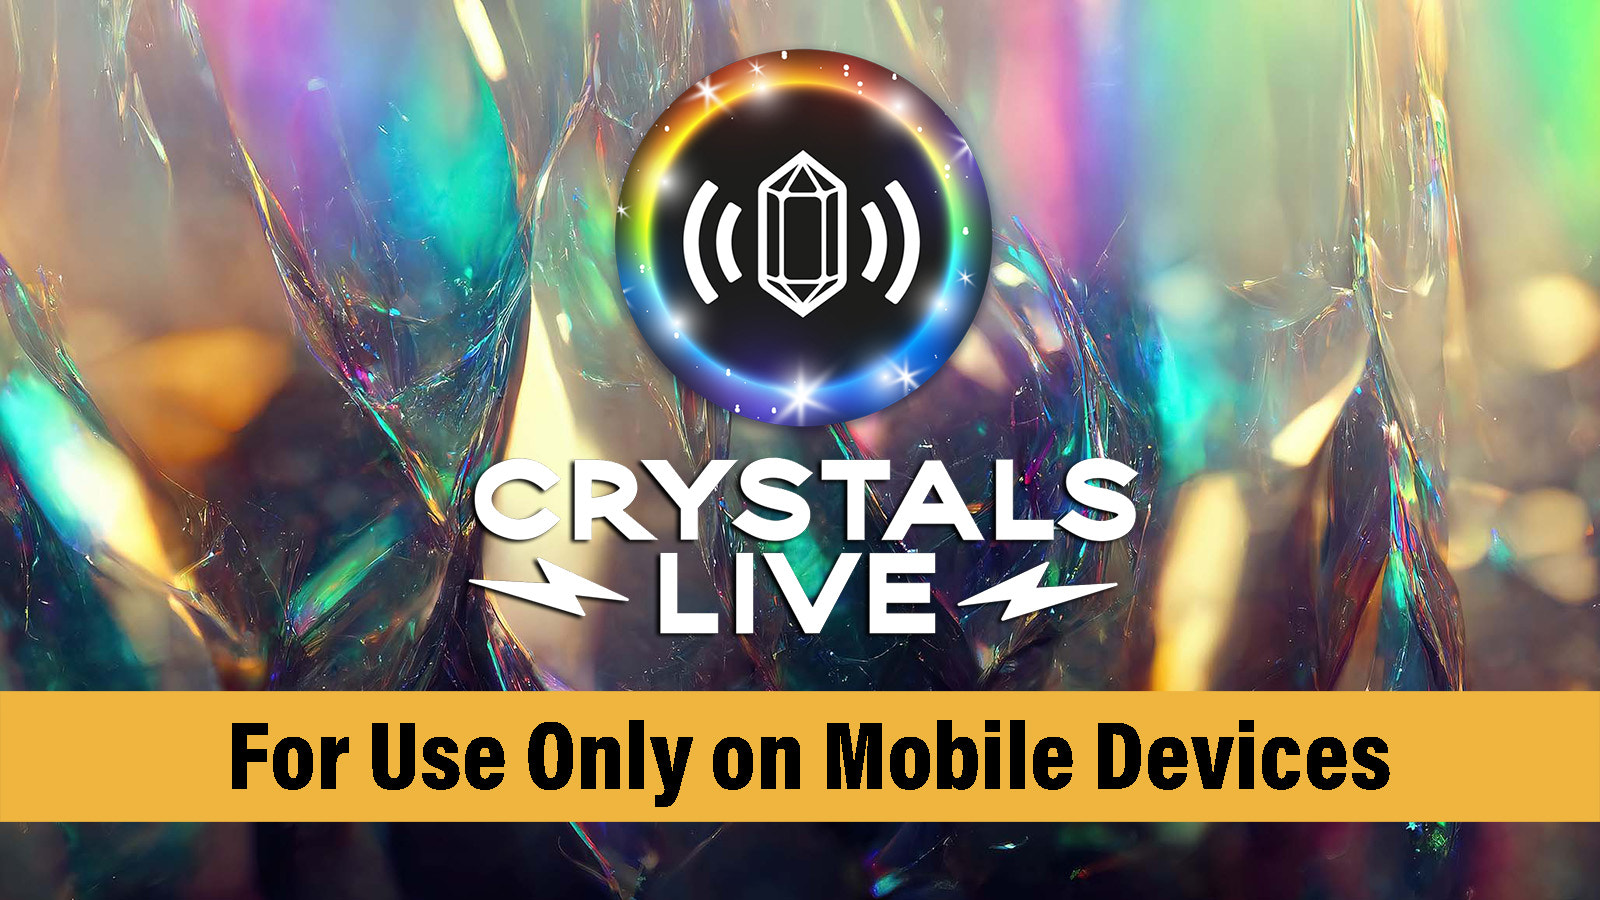 Crystals Live is een Mobile Only App